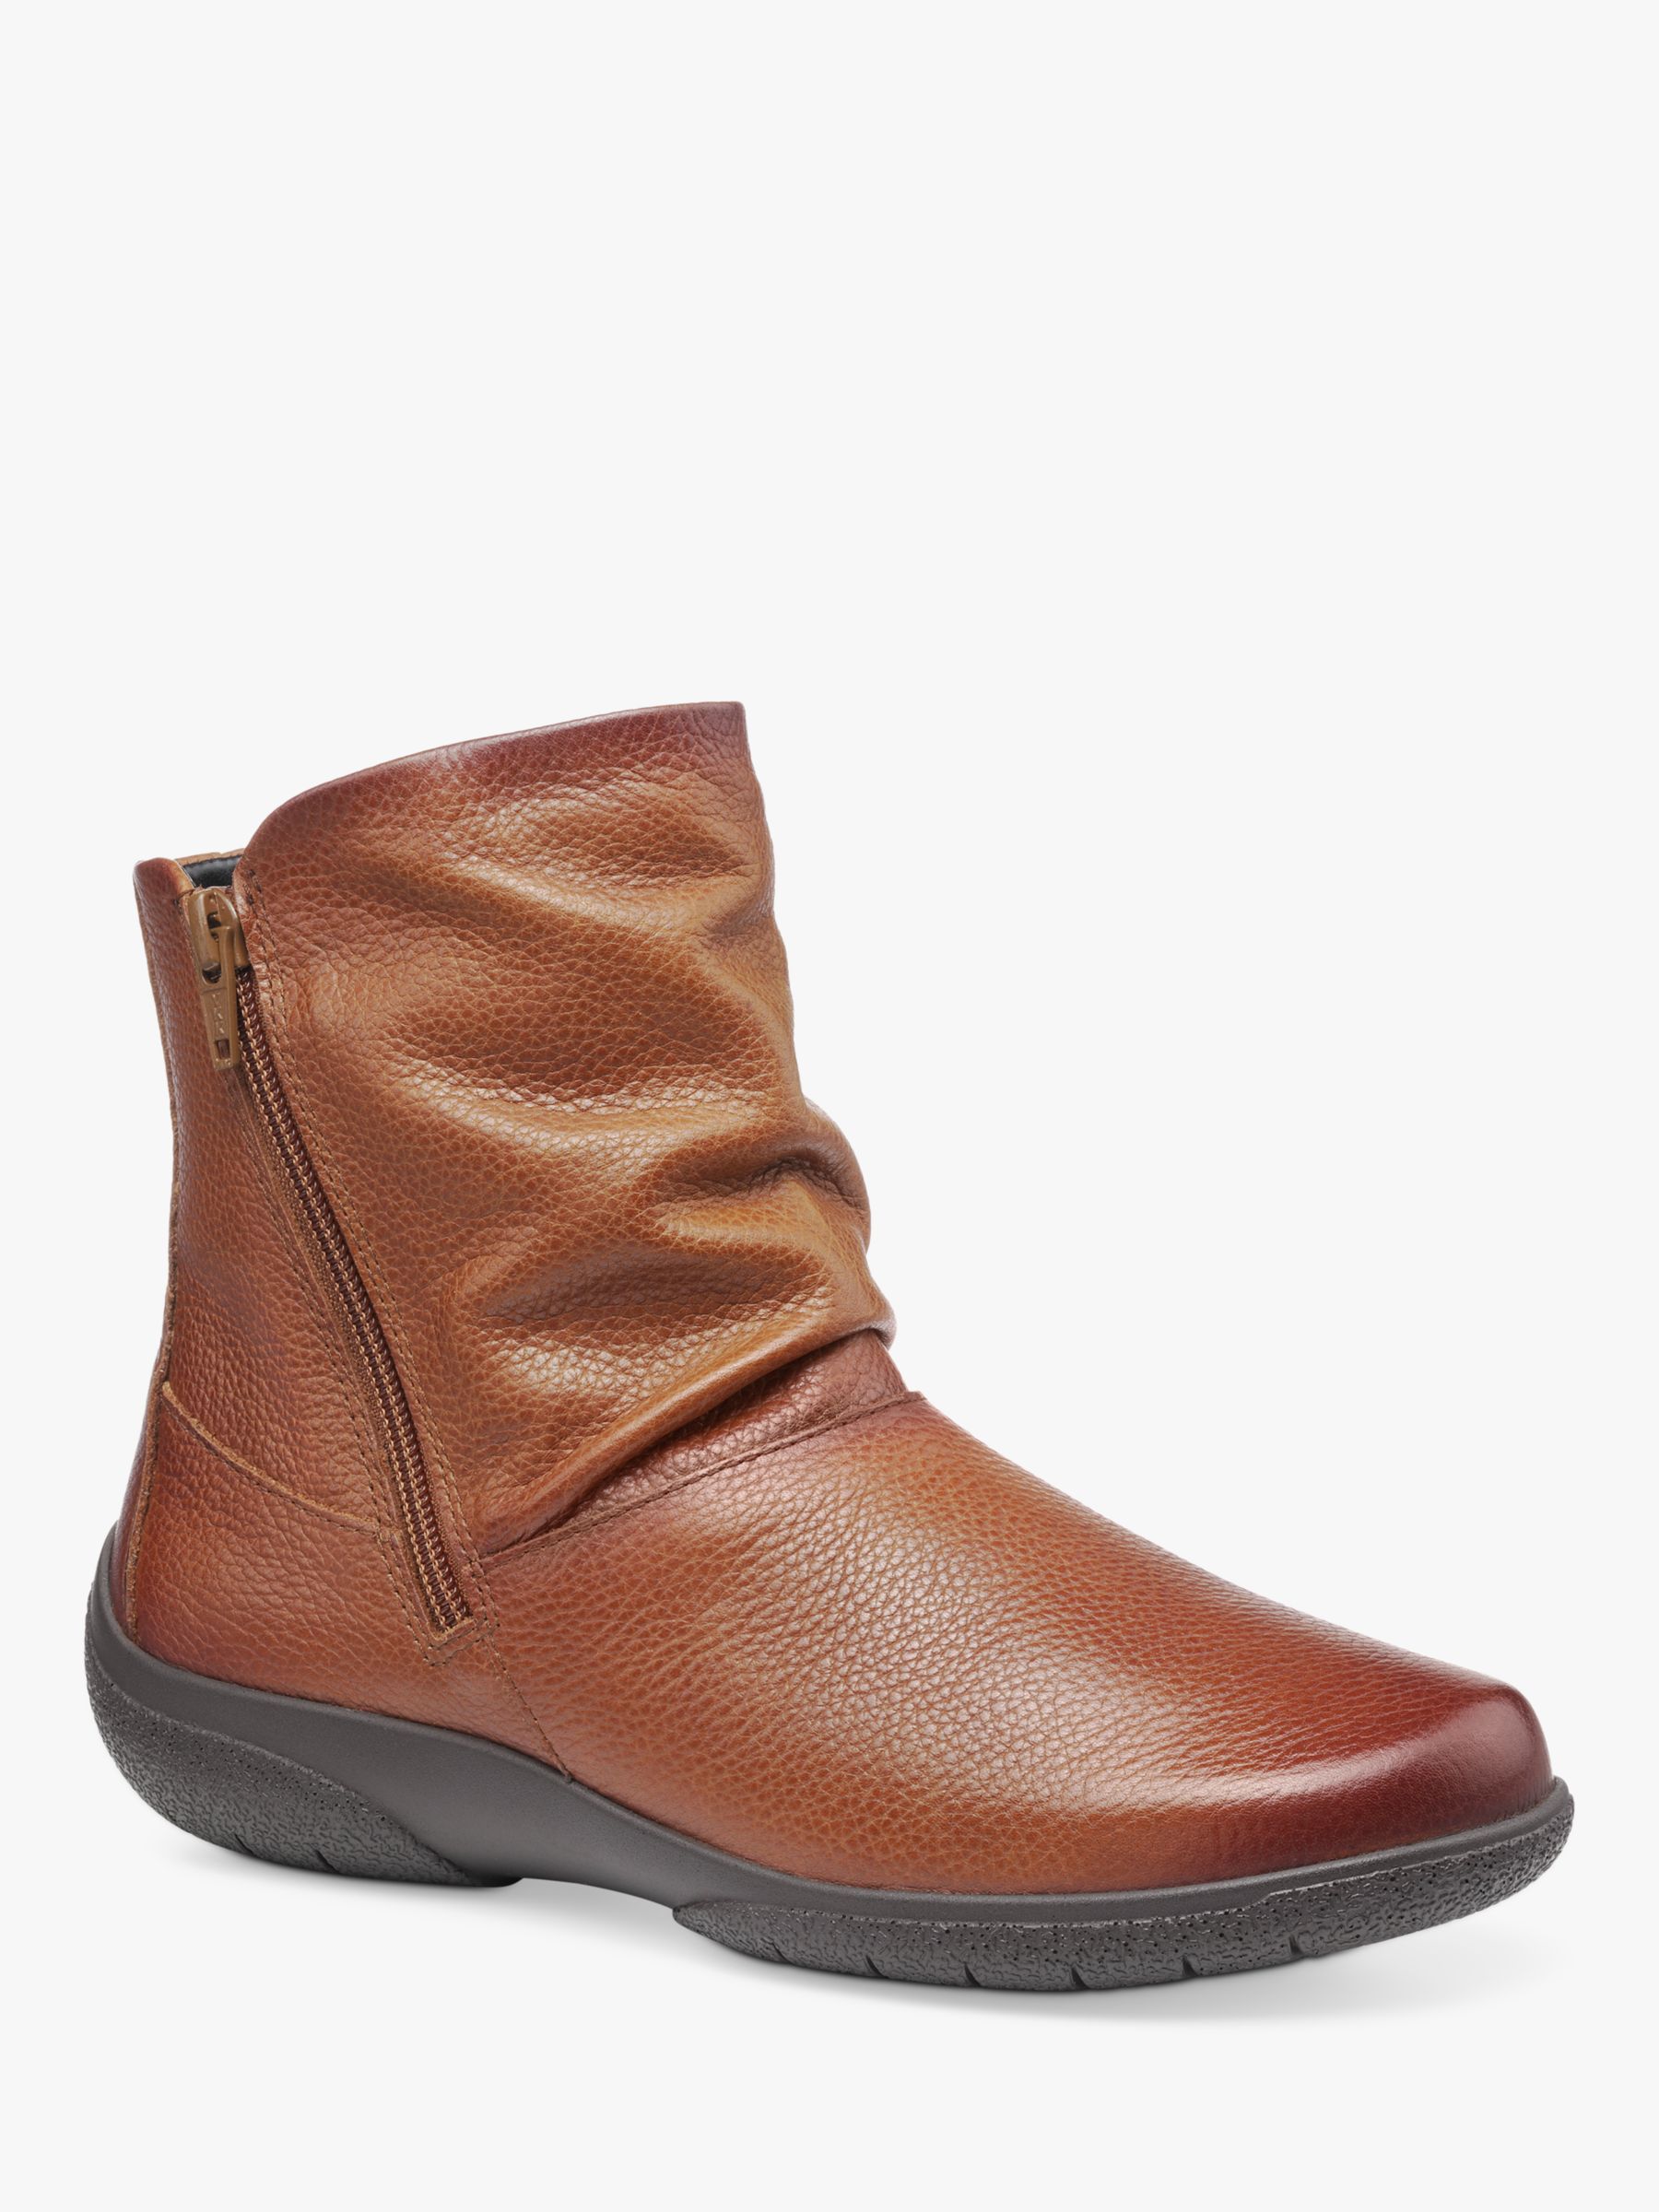 Buy Hotter Whisper Slouch Ankle Boots Online at johnlewis.com